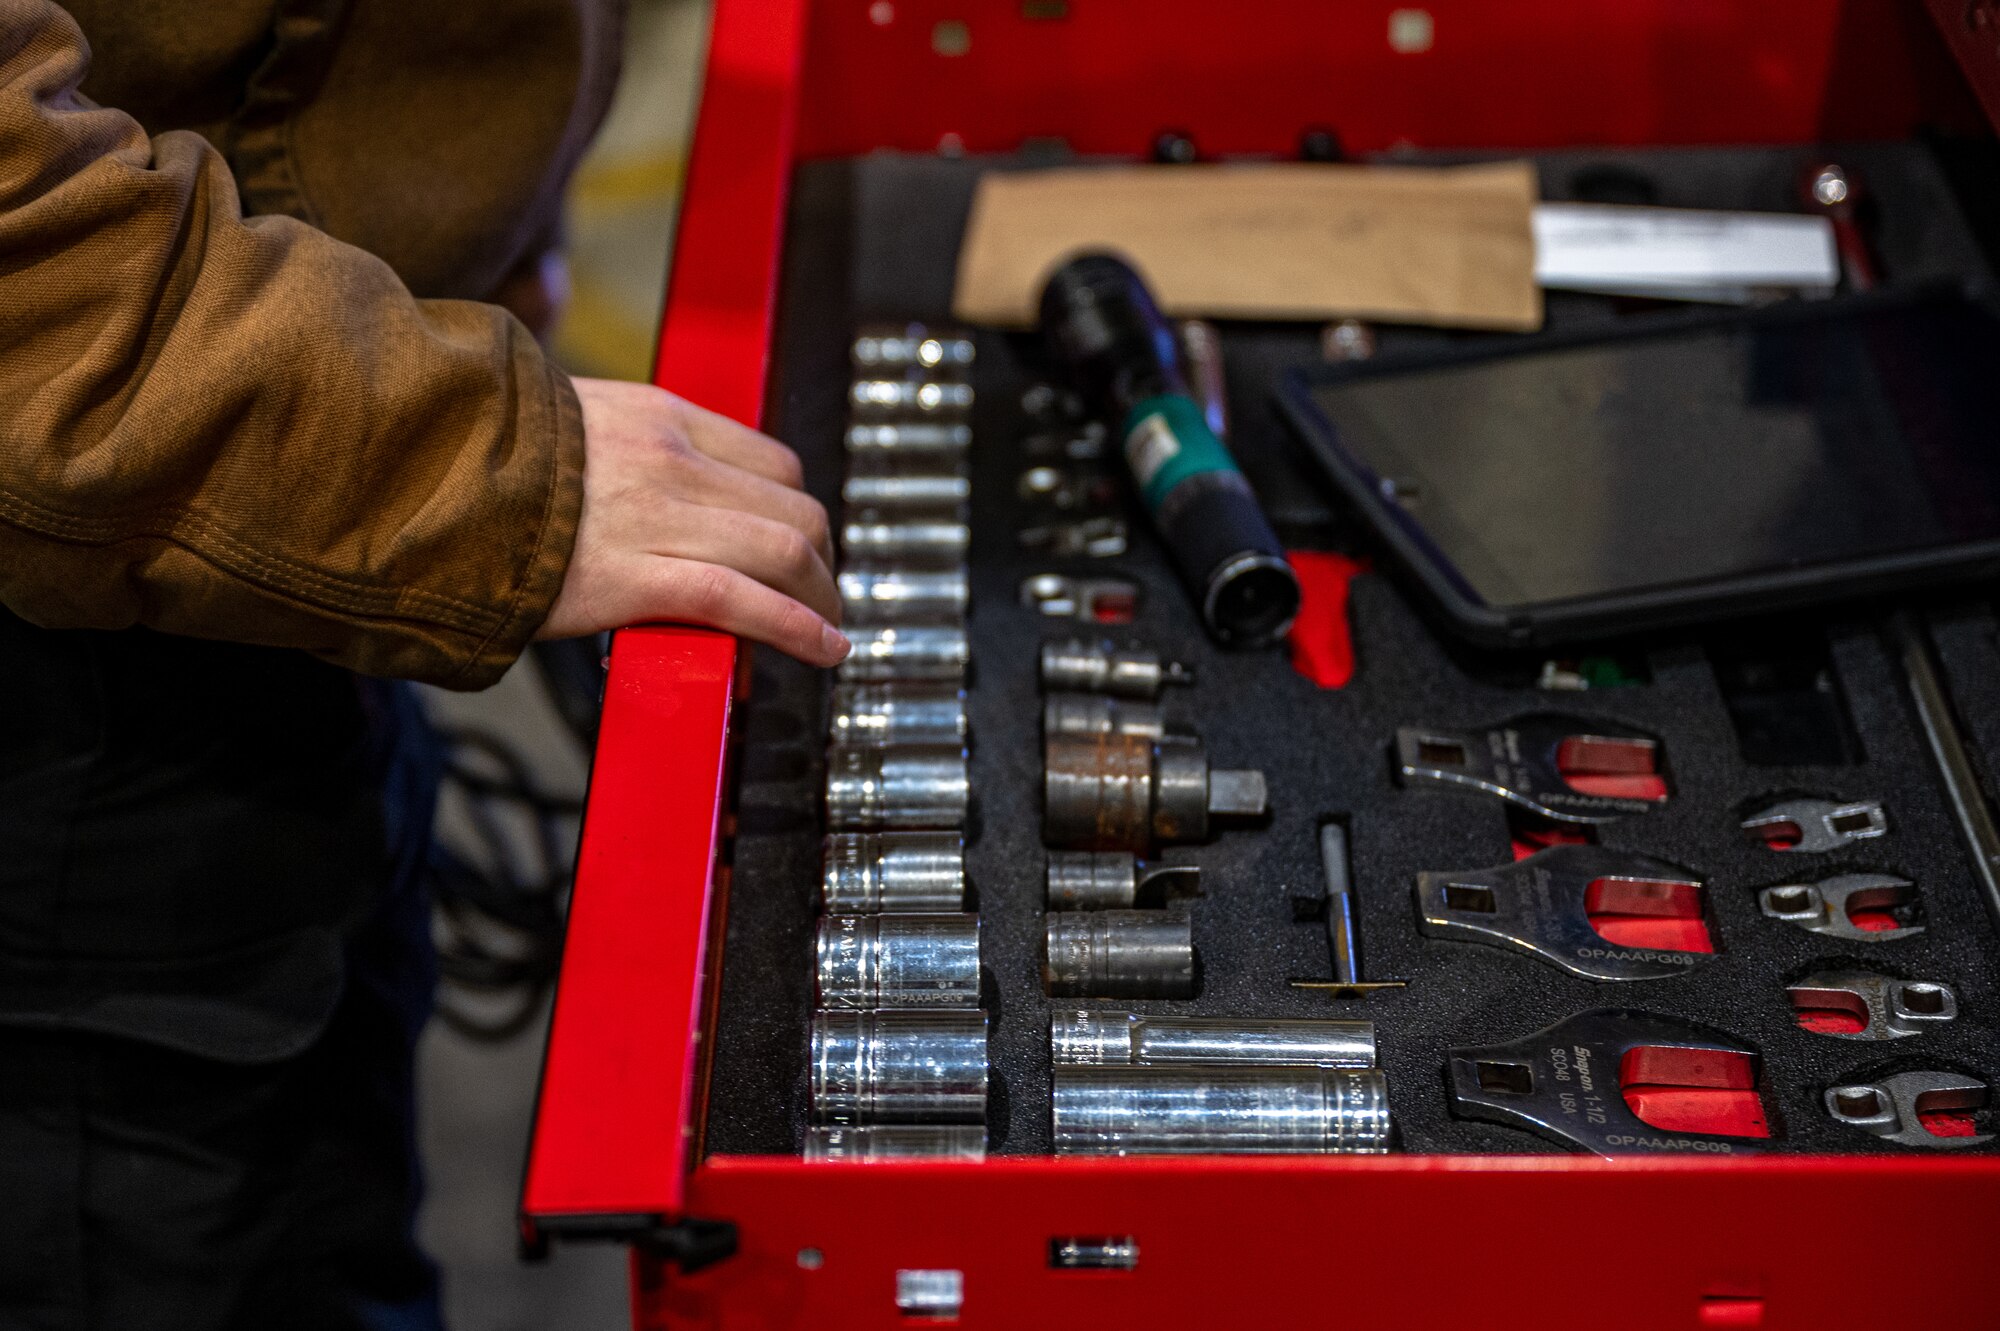 U.S. Air Force Airman 1st Class Tucker Arnold, 25th Fighter Generation Squadron crew chief, opens a toolbox drawer before a pre-flight inspection at Osan Air Base, Republic of Korea, Jan. 22, 2024. Proper composite tool kit inventories are essential to maintain because a misplaced tool could end up being drawn into the engine and damage the aircraft. The APG section ensures aircraft are fully mission capable and ready to “Fight Tonight”. (U.S. Air Force photo by Airman 1st Class Chase Verzaal)